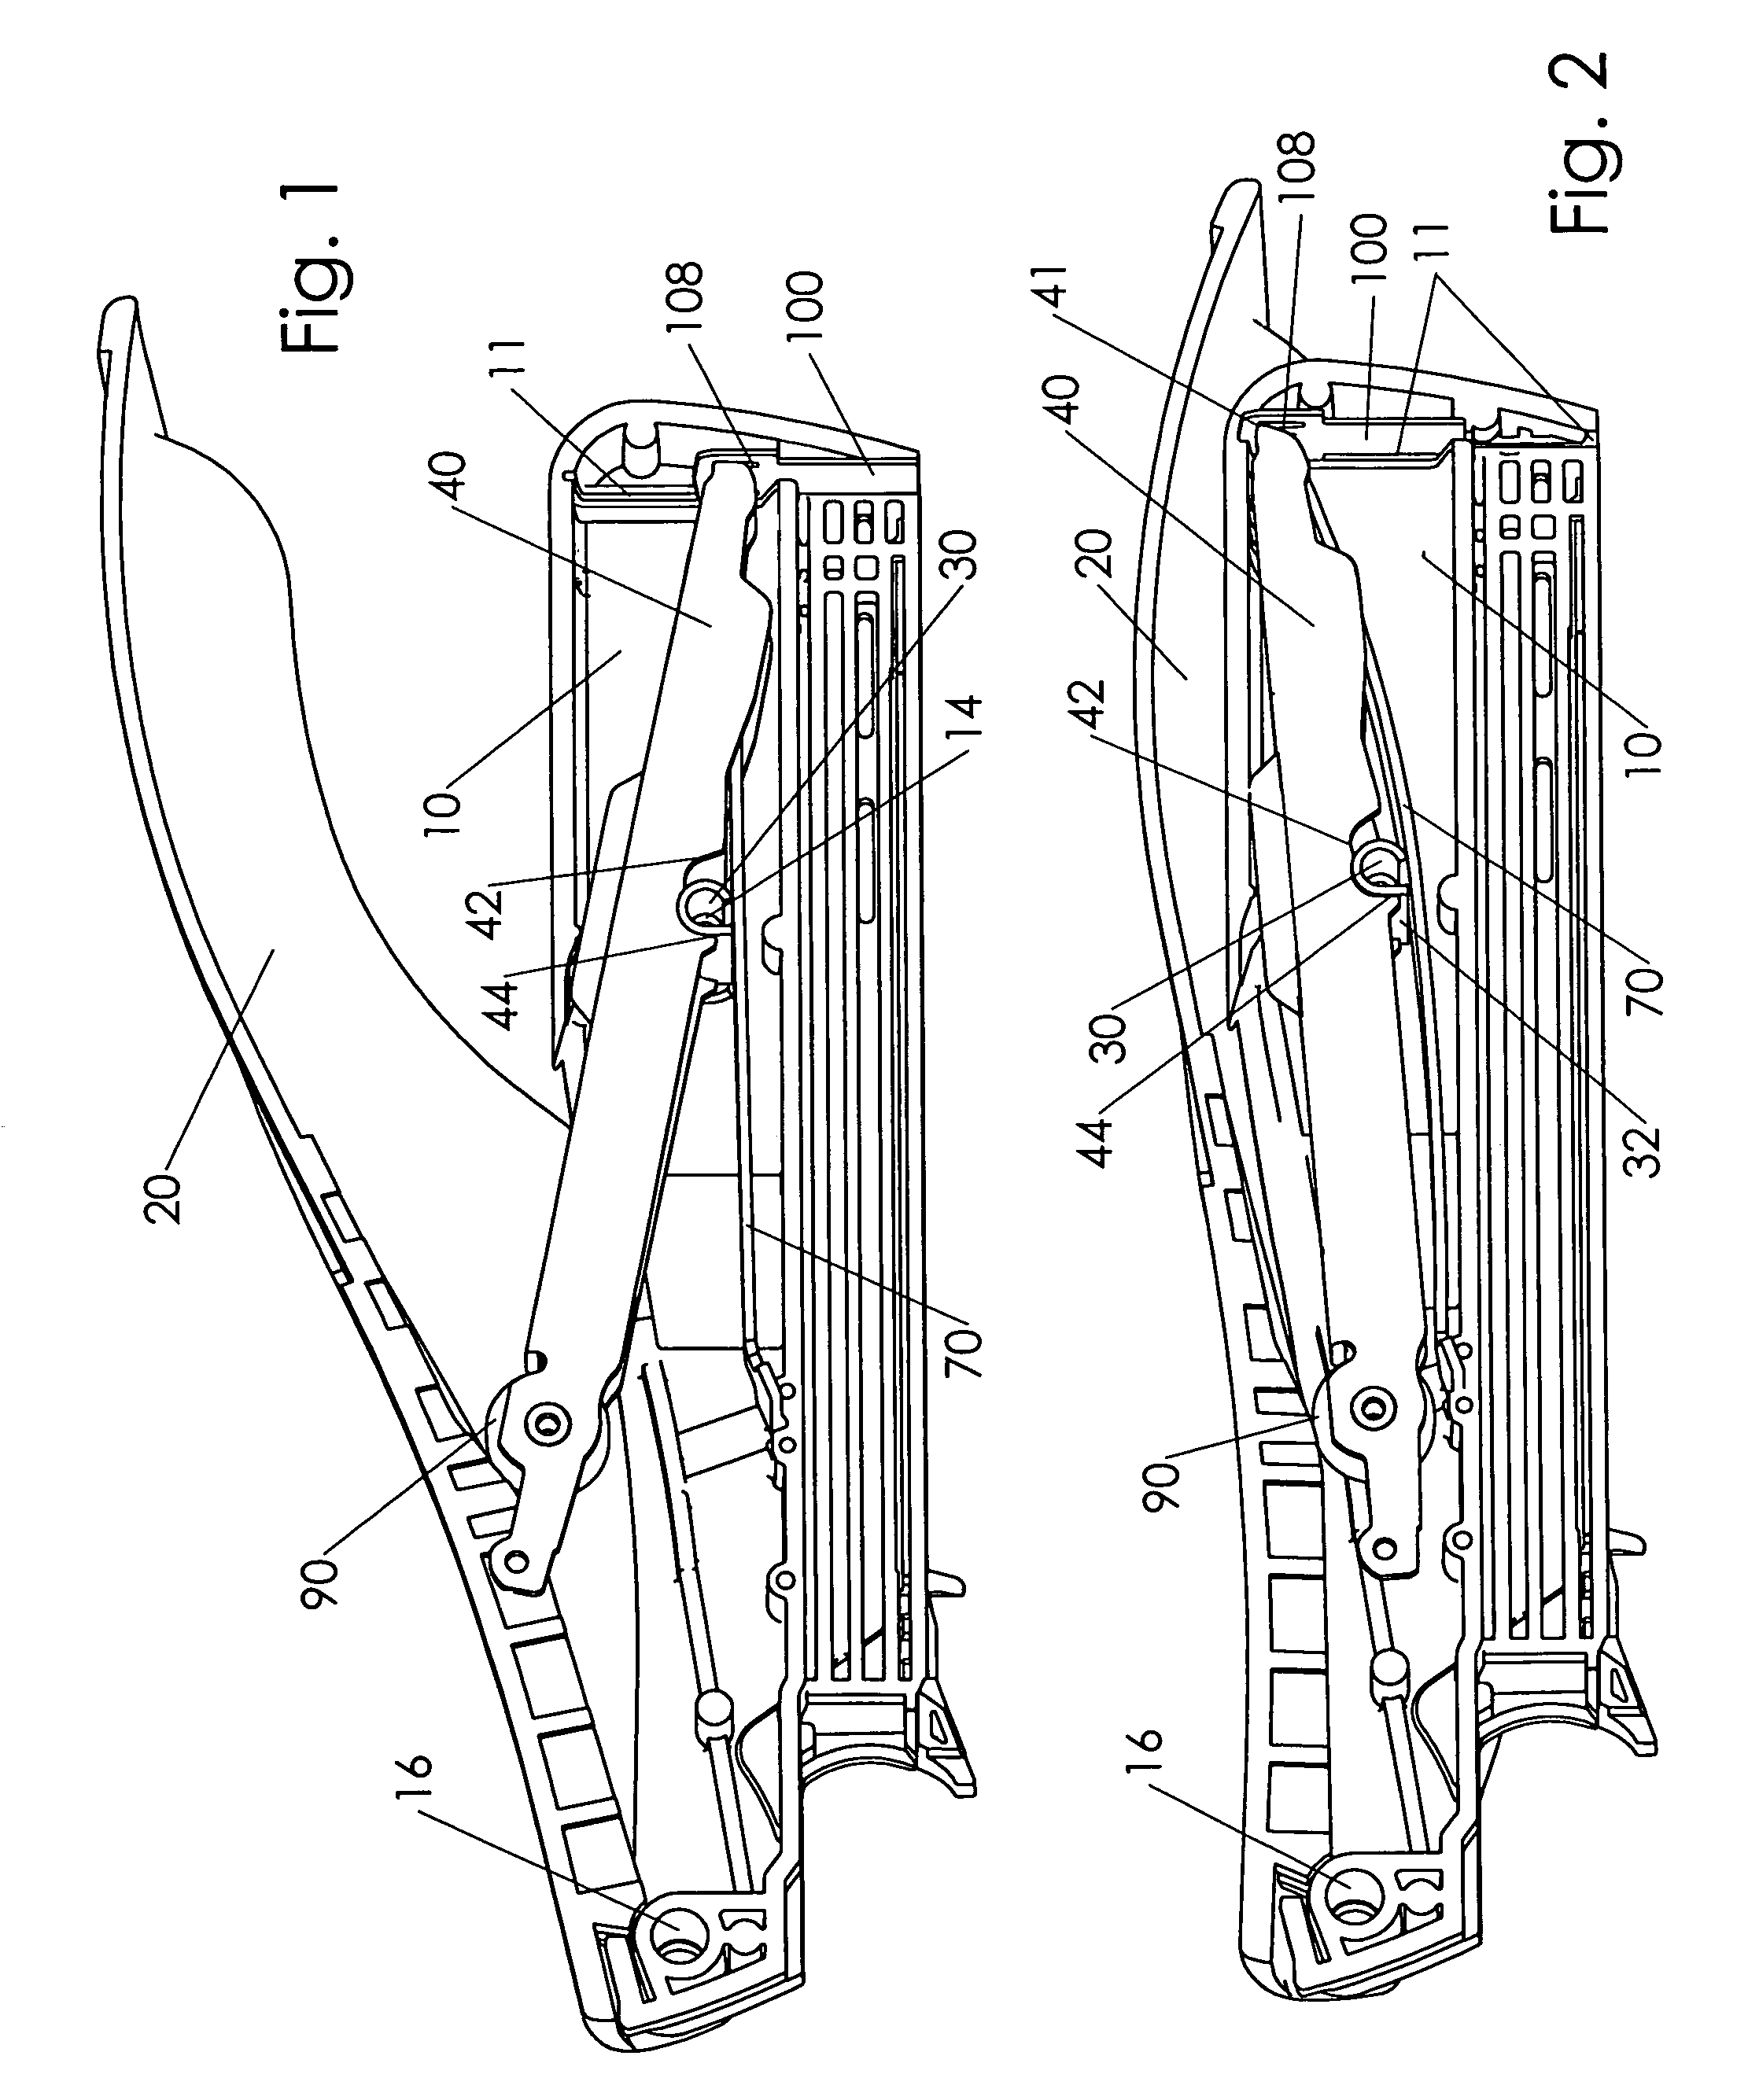 Spring energized stapler lever fulcrum in low position